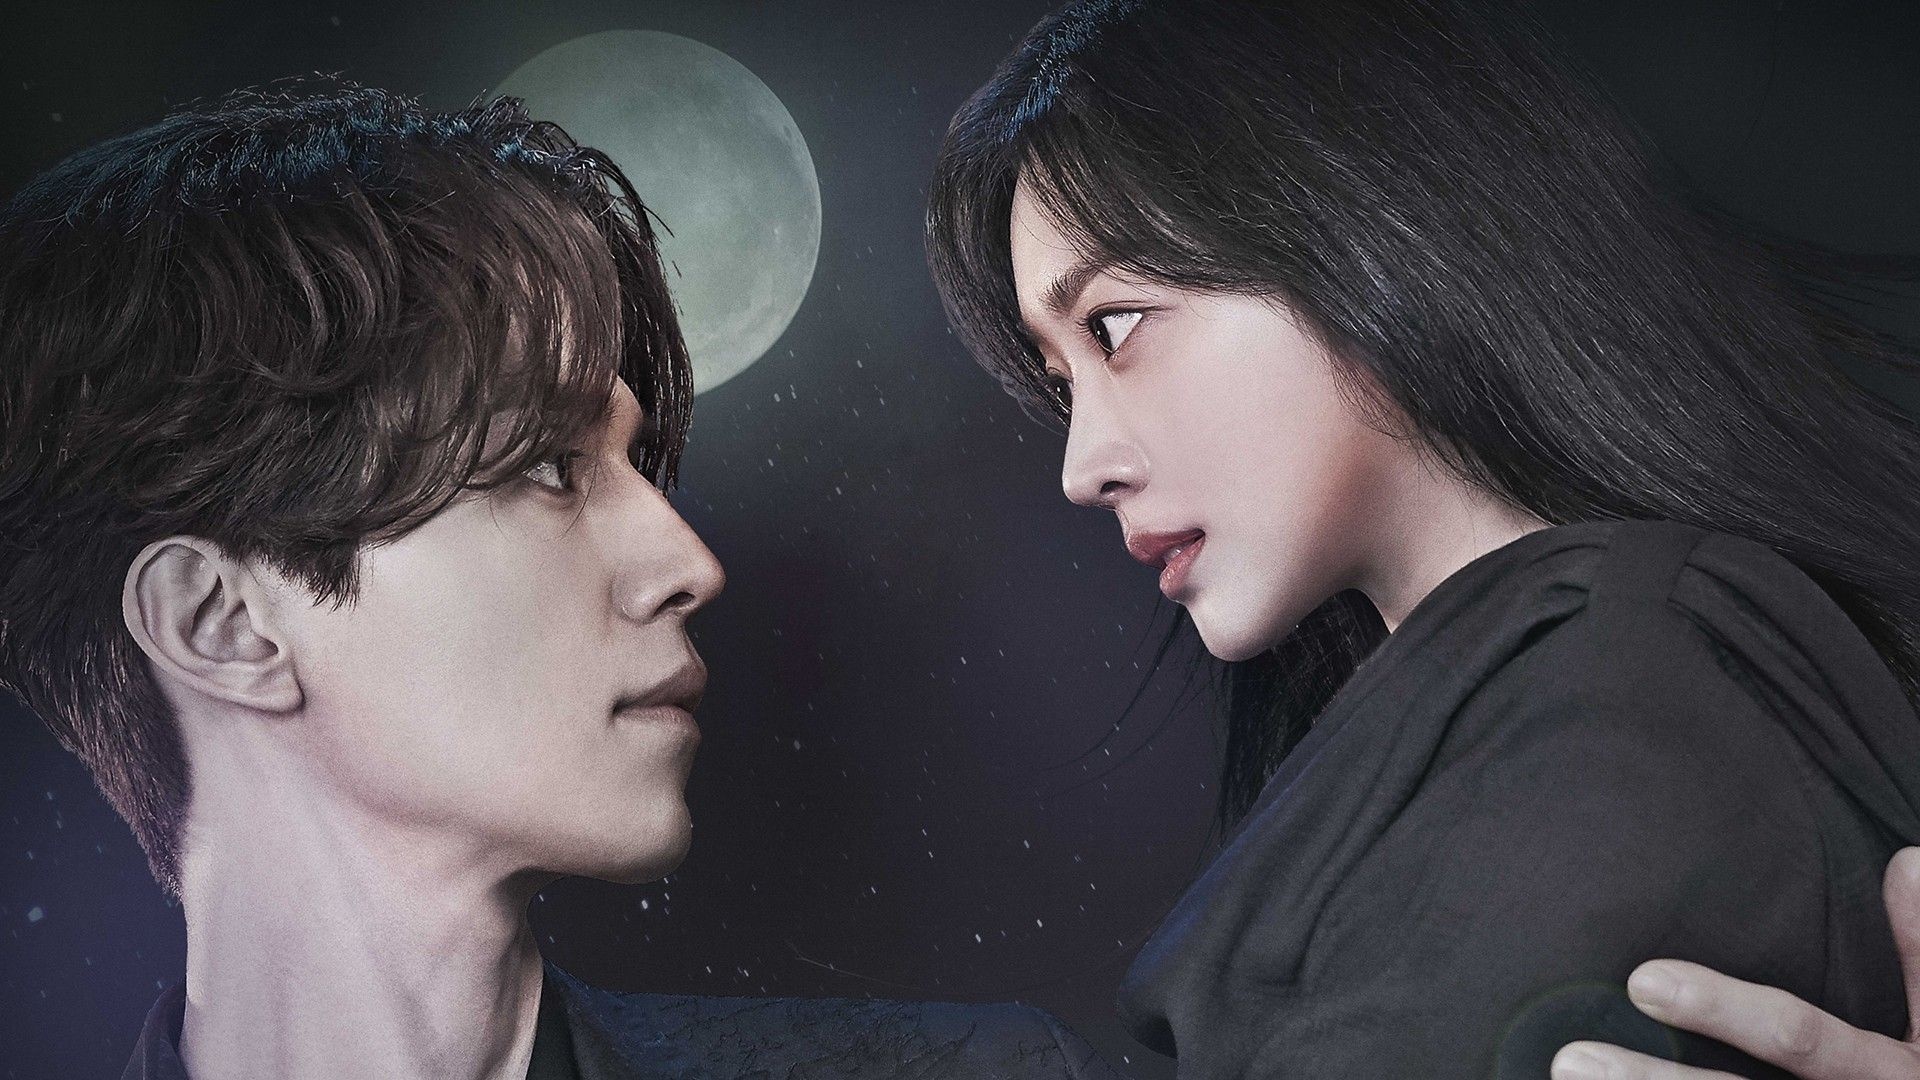 Tale of the Nine Tailed (TV Series): Lee Dong-wook and Jo Bo-ah, Nam Ji-ah and Lee Yeon. 1920x1080 Full HD Background.